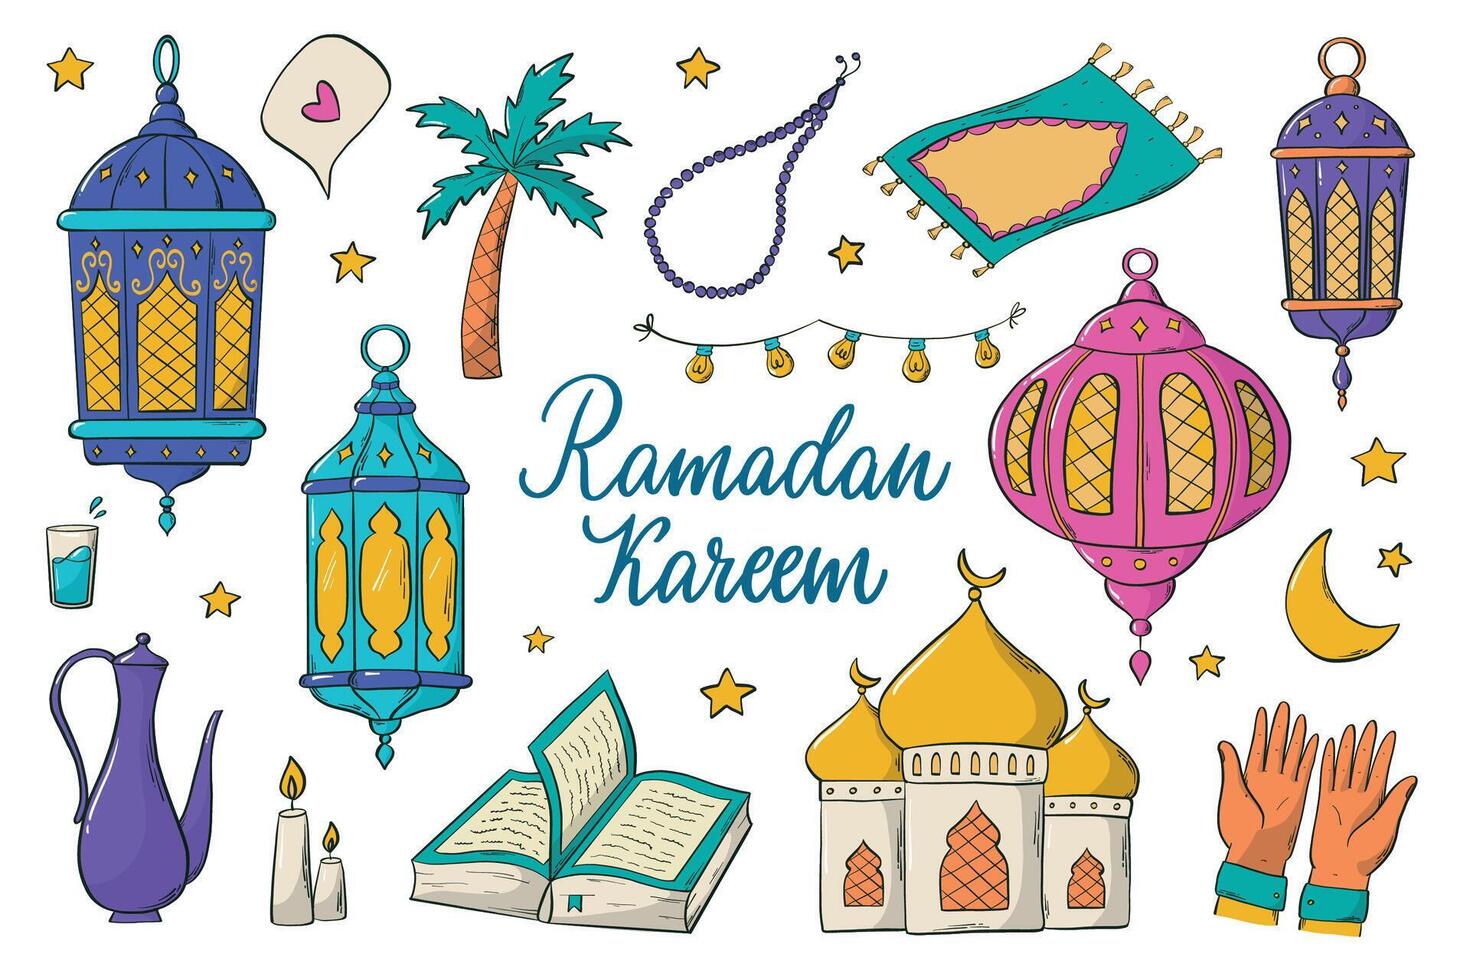 Set of Ramadan doodles, islamic clipart, cartoon elements for stickers, prints, cards, signs, sublimation, decor, etc. EPS 10 vector